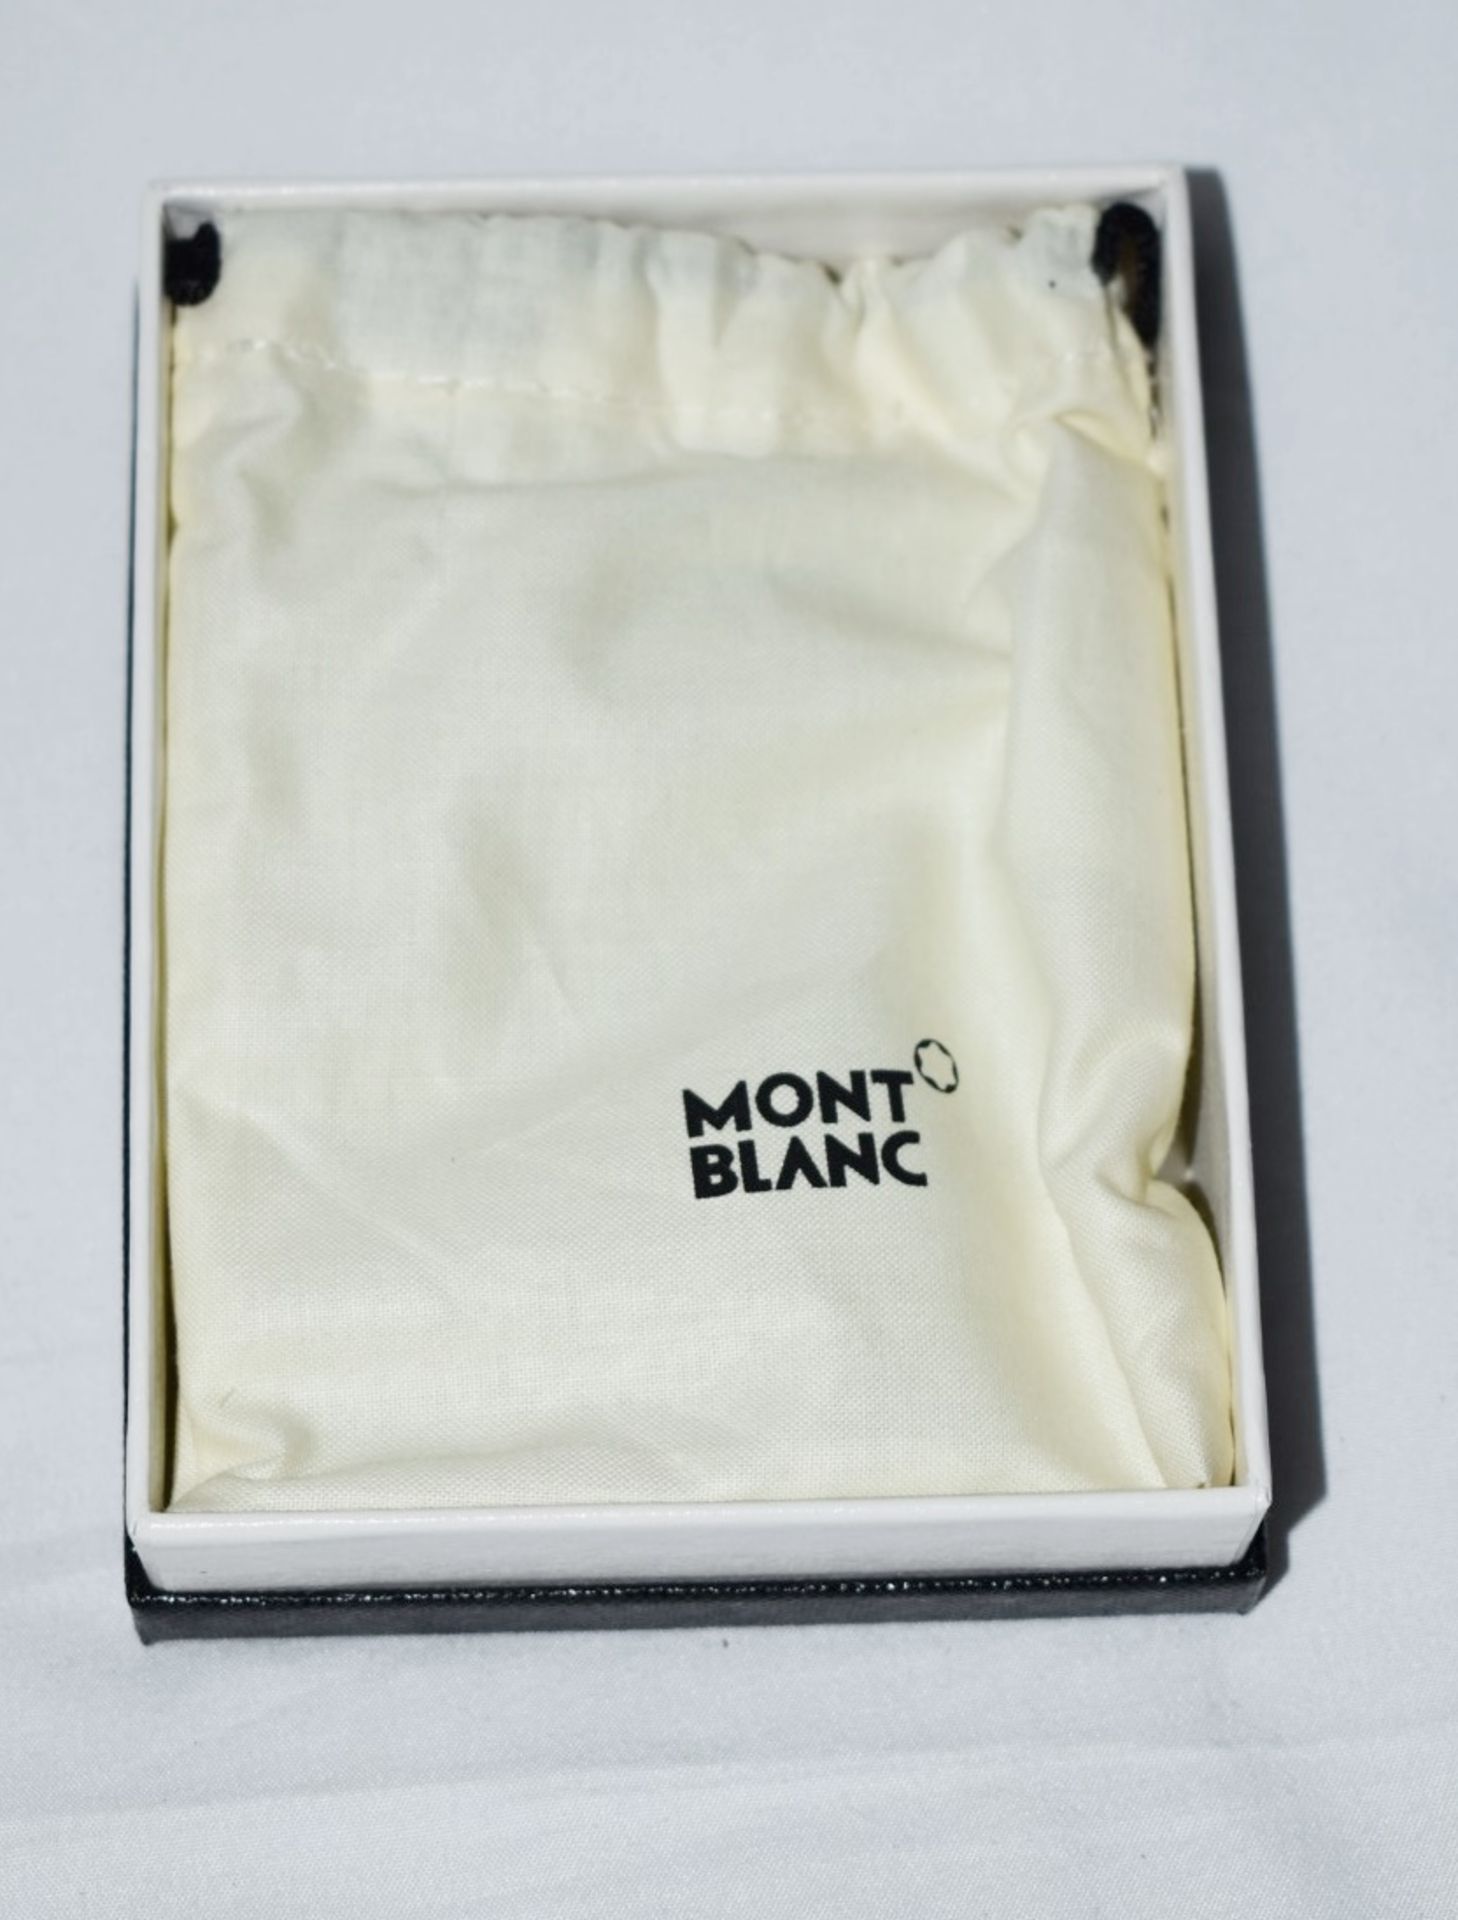 1 x MONTBLANC Sartorial Blue Luxury Leather Card Holder - Original Price £160.00 - Boxed Stock - Image 8 of 10